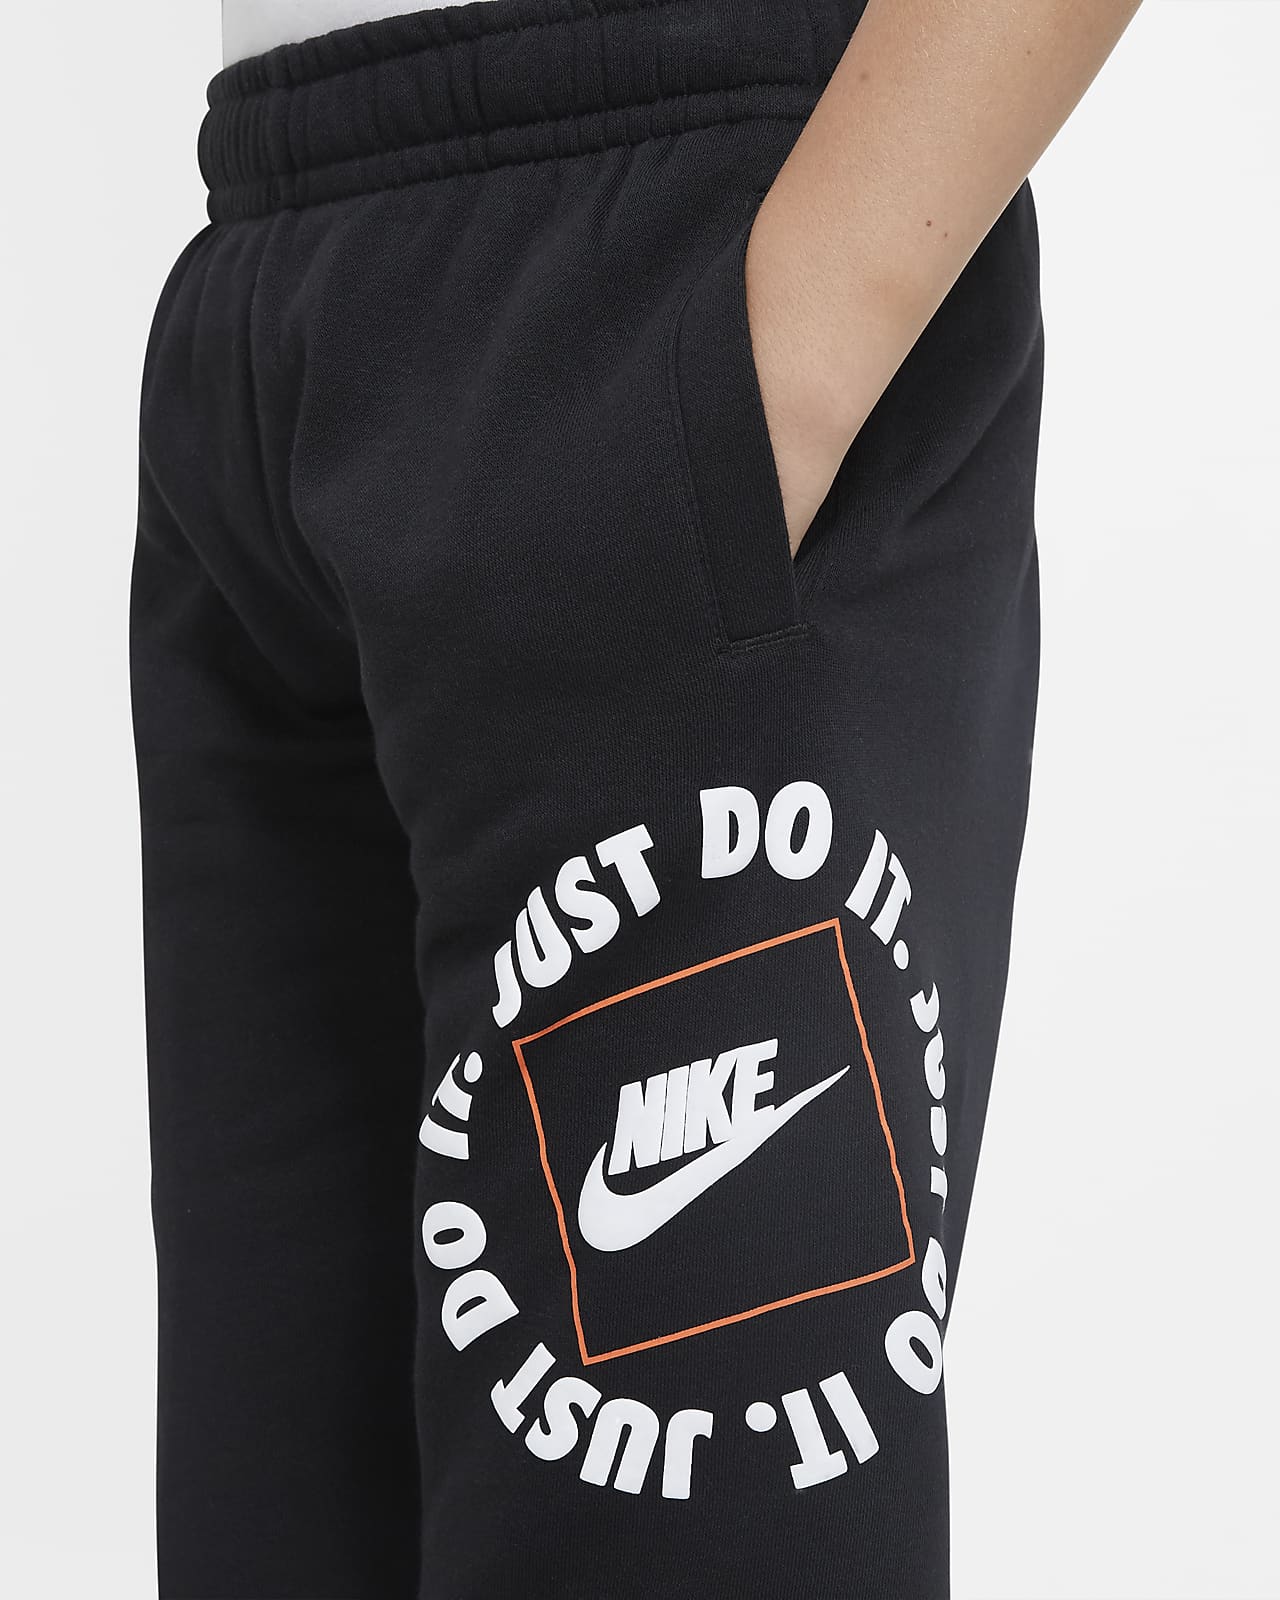 nike trousers for boys